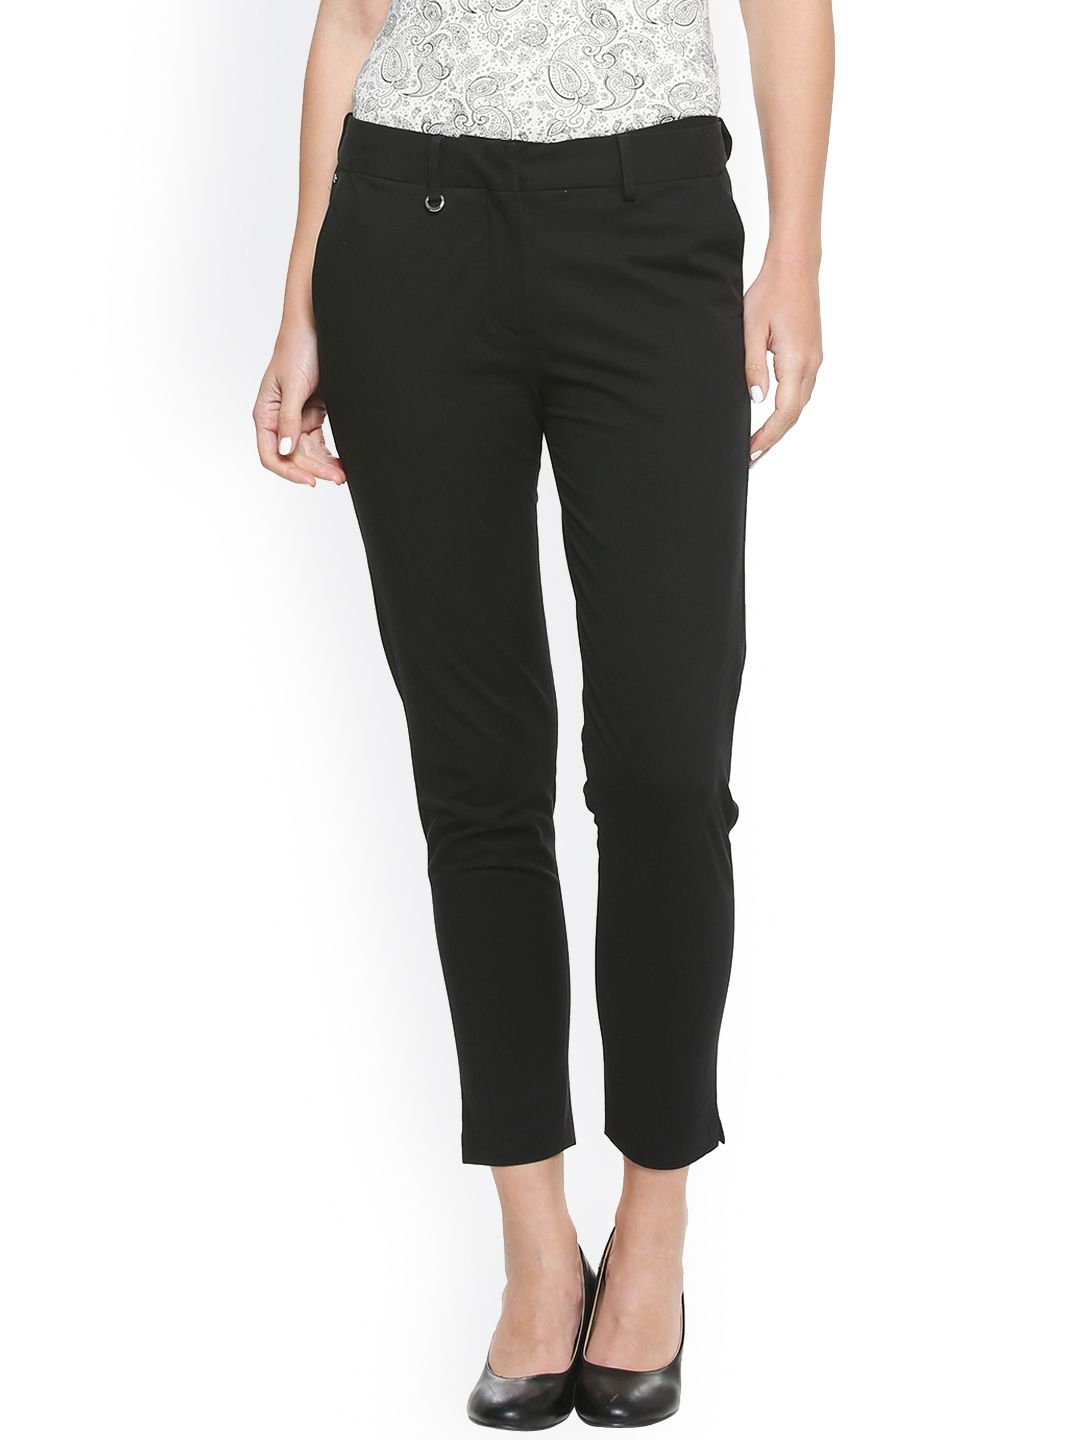 Allen Solly Woman Black Slim Fit Solid Regular Trousers Price in India